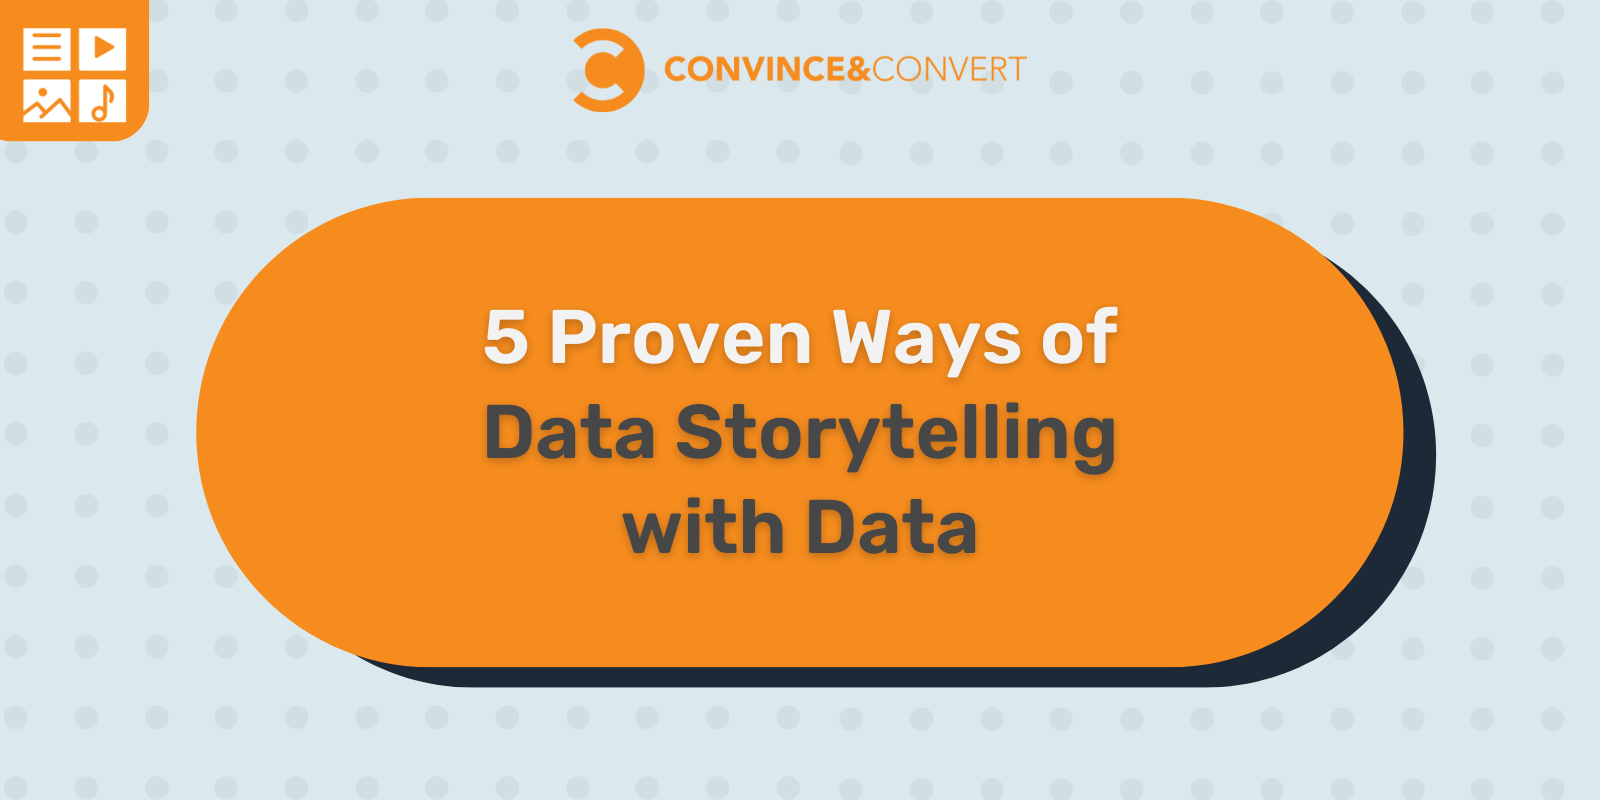 5 Proven Ways of Data Storytelling with Data